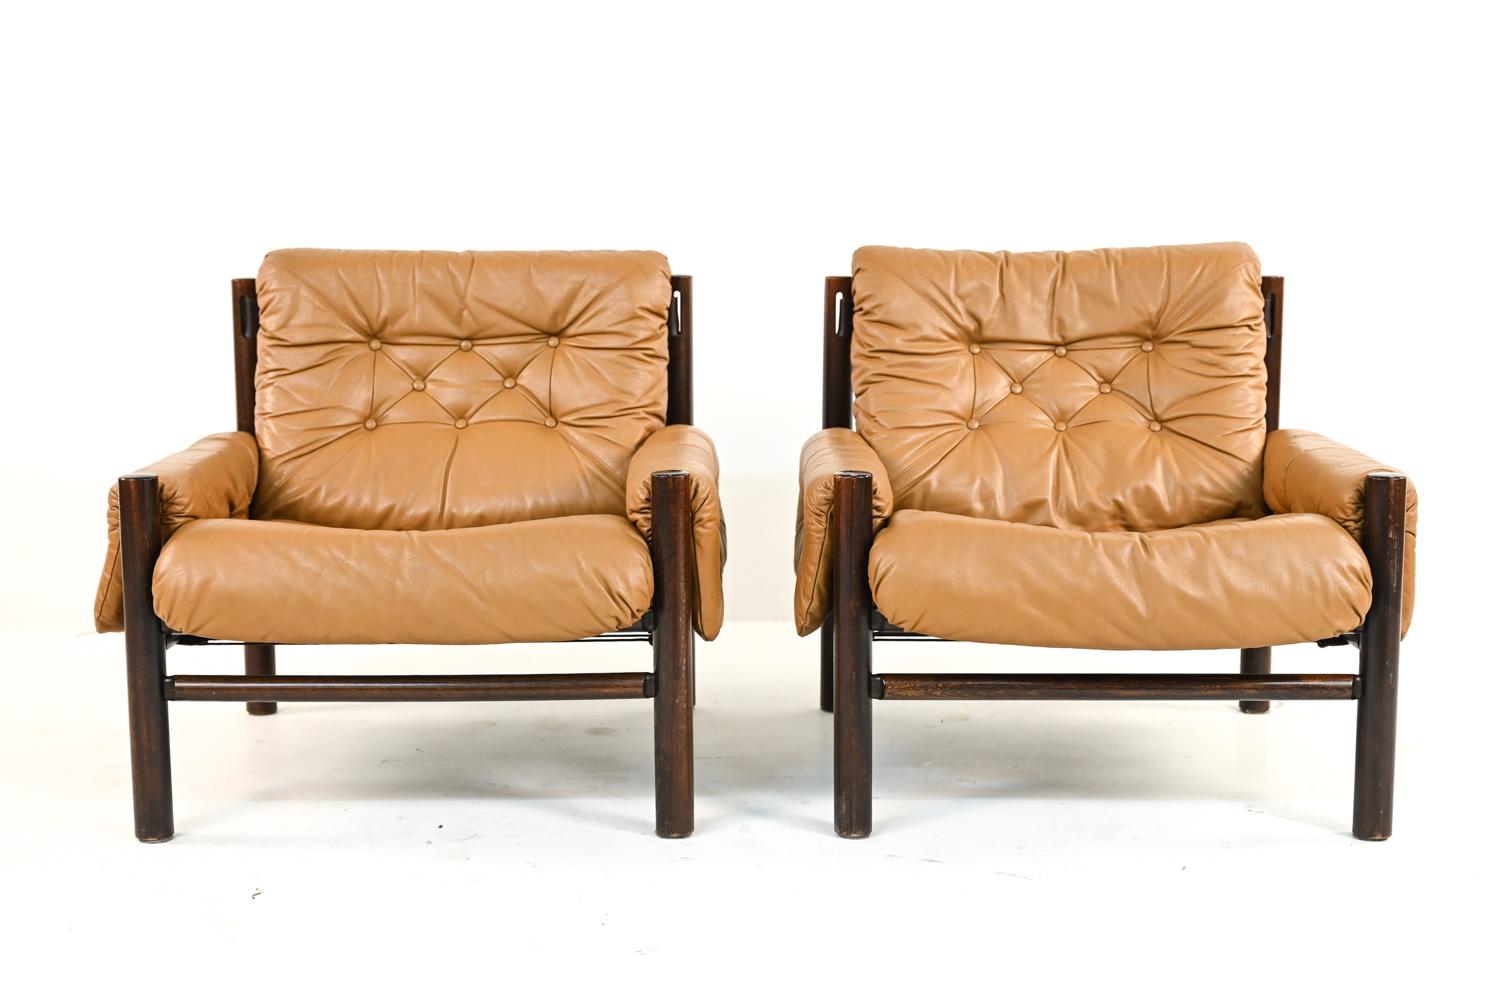 20th Century Pair of Danish Mid-Century Percival Lafer/Arne Norell Style Lounge Chairs